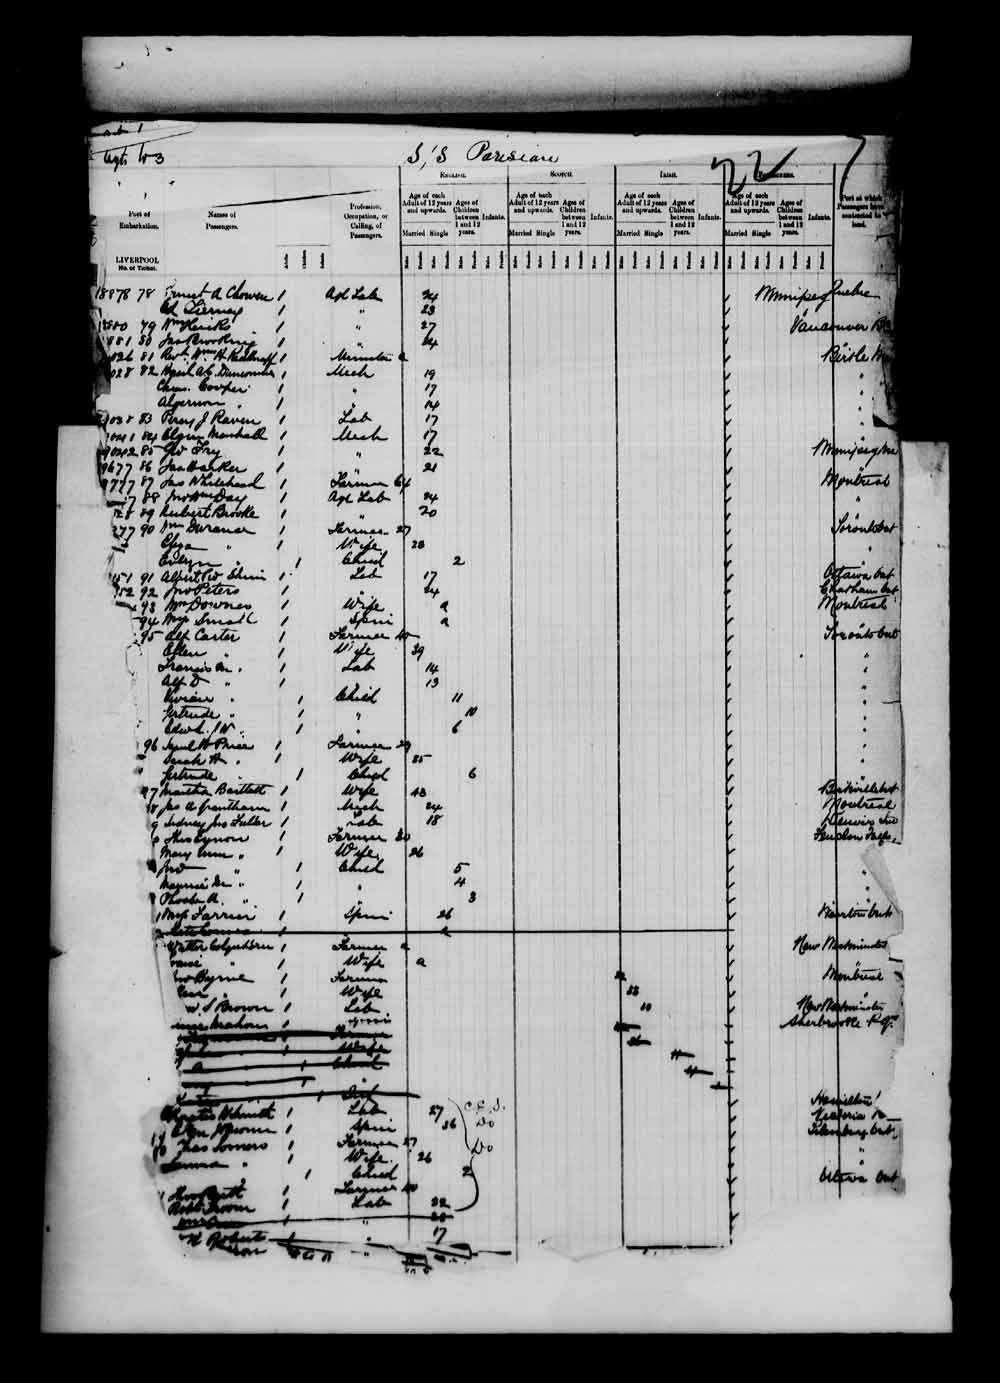 Digitized page of Passenger Lists for Image No.: e003549674